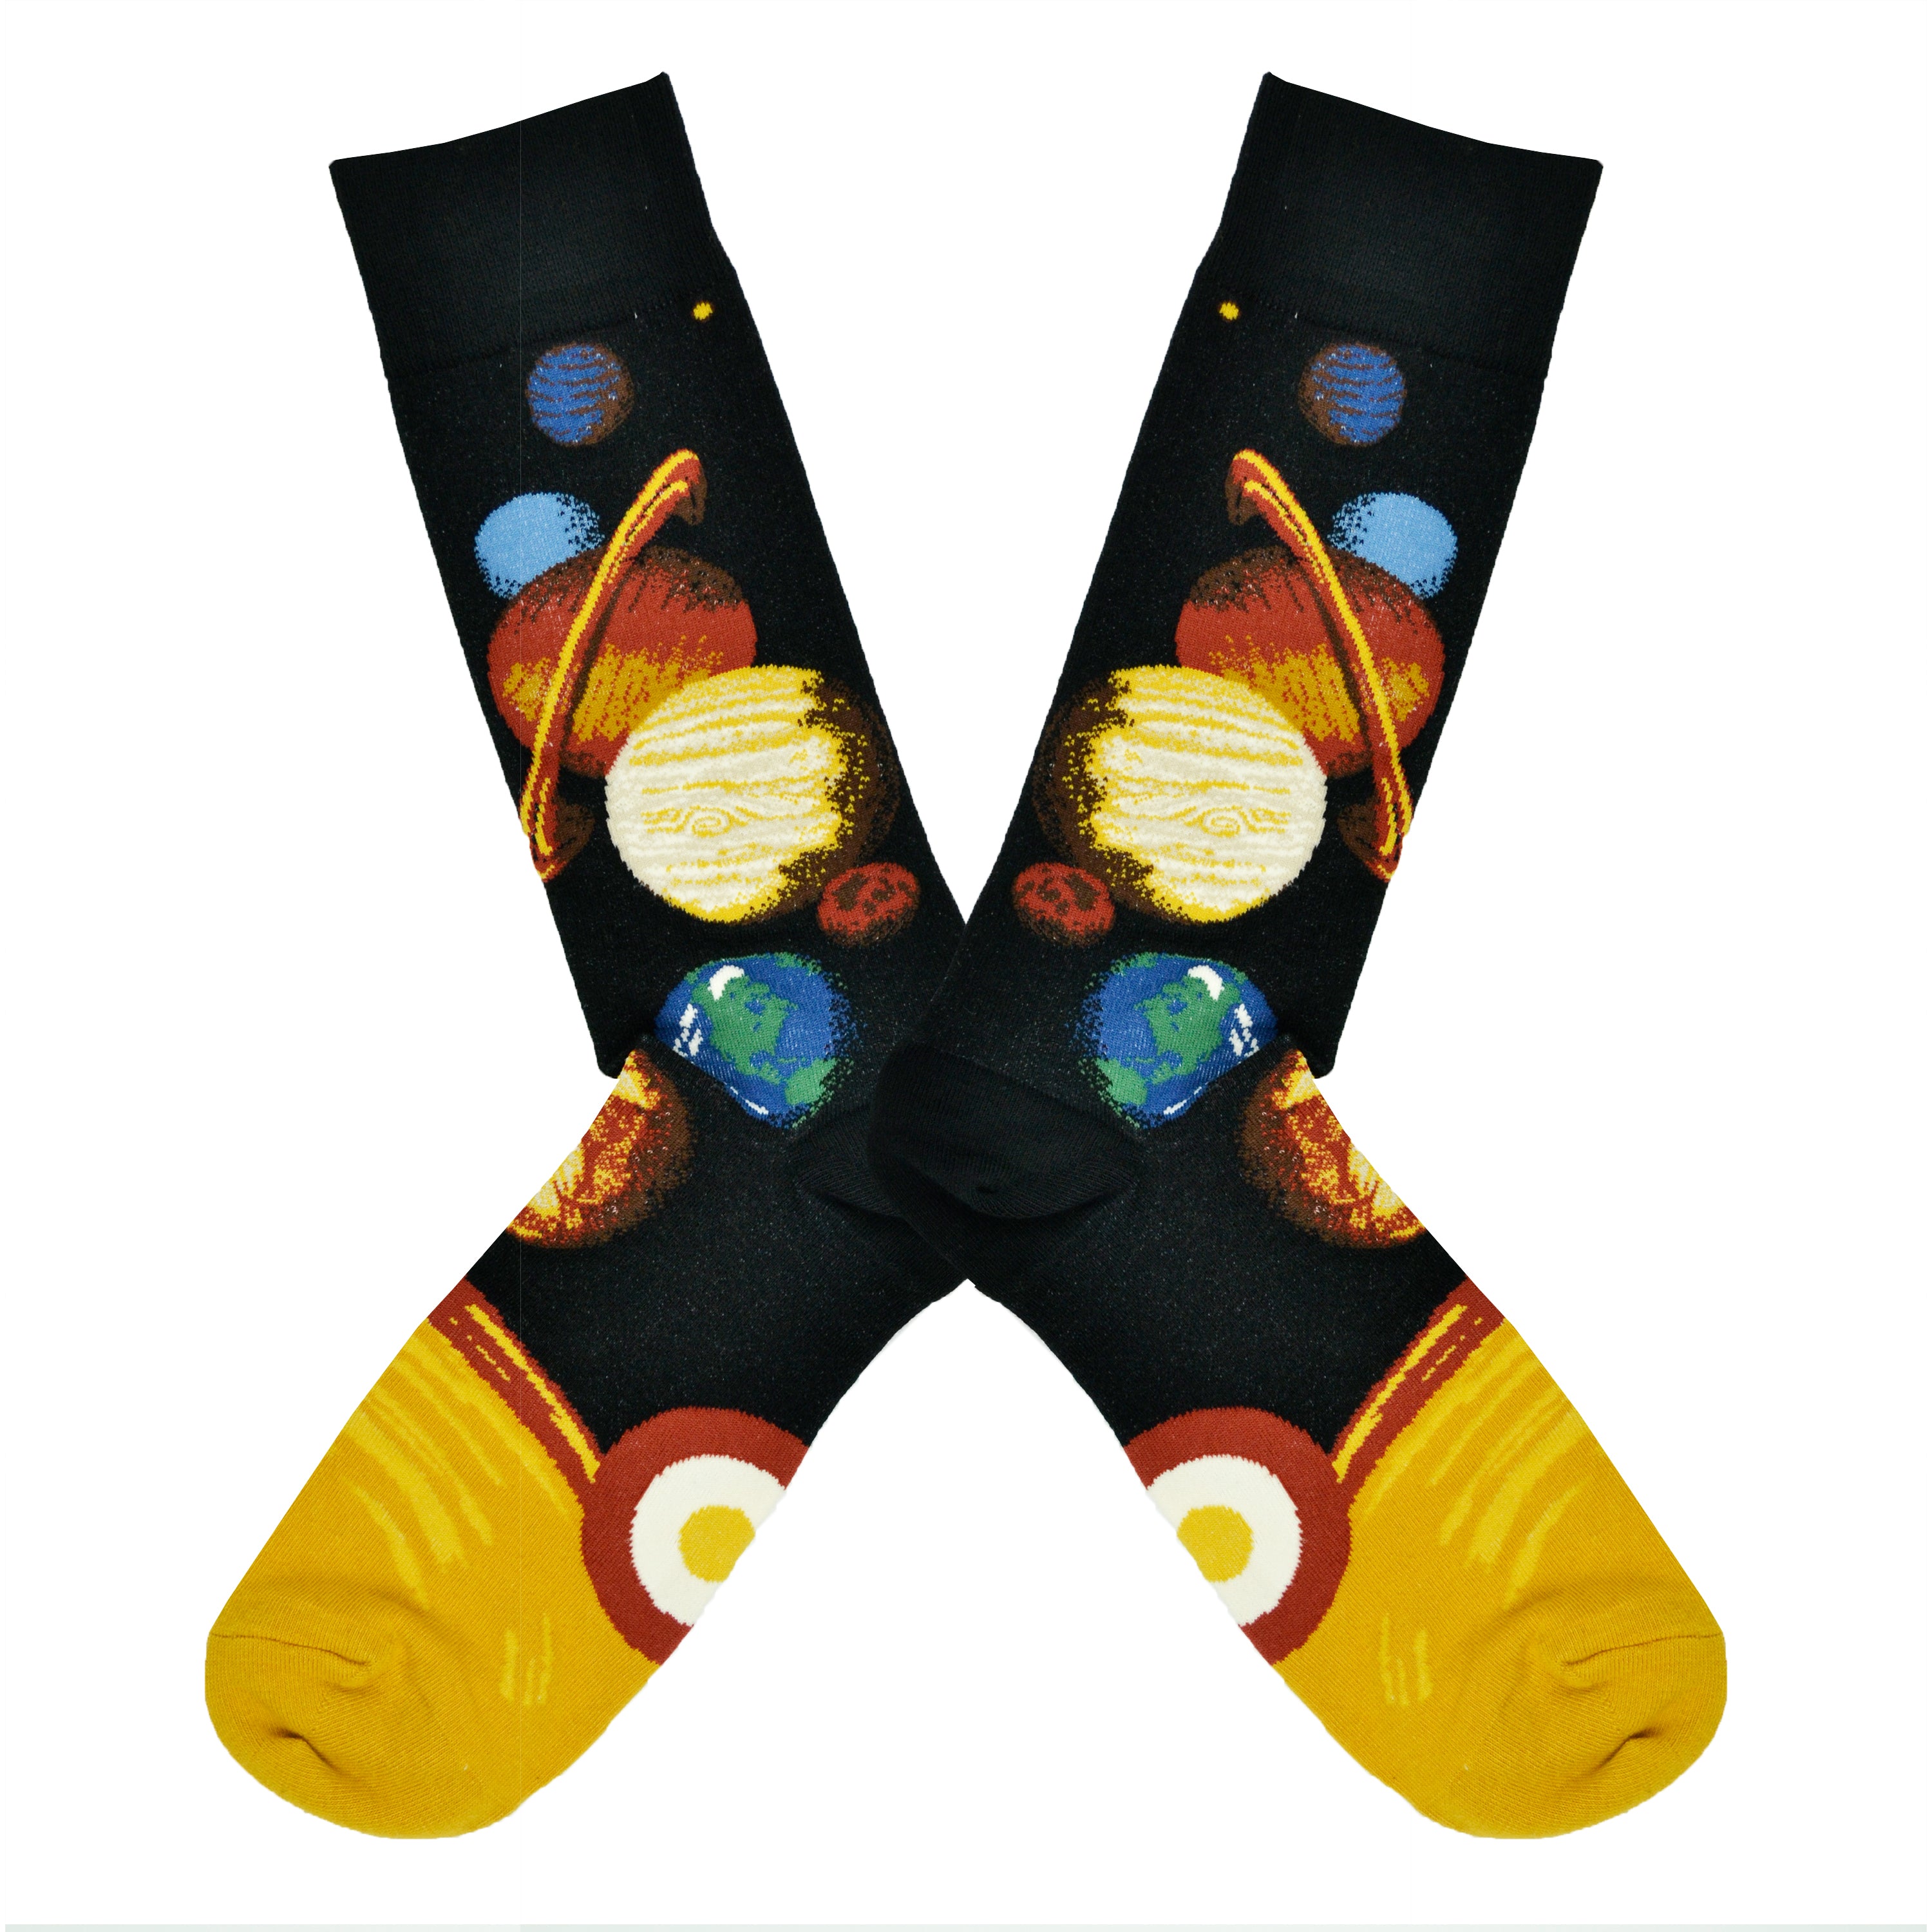 Shown in a flatlay, a pair of Mod Socks’ black cotton men's crew socks with the entire planetary system in large detail